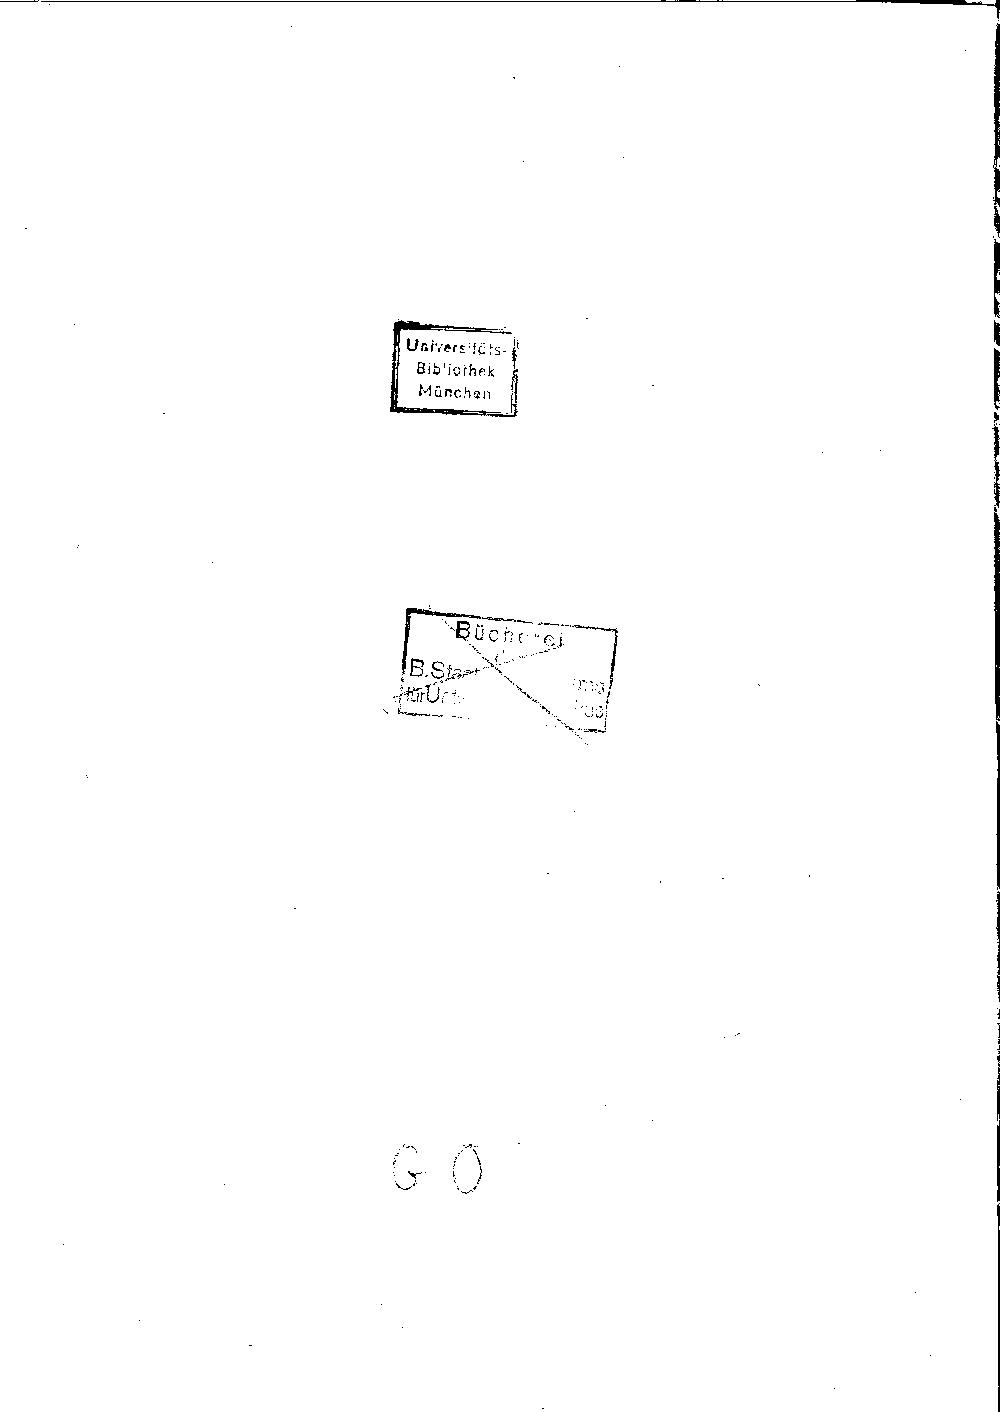 Scan of page II